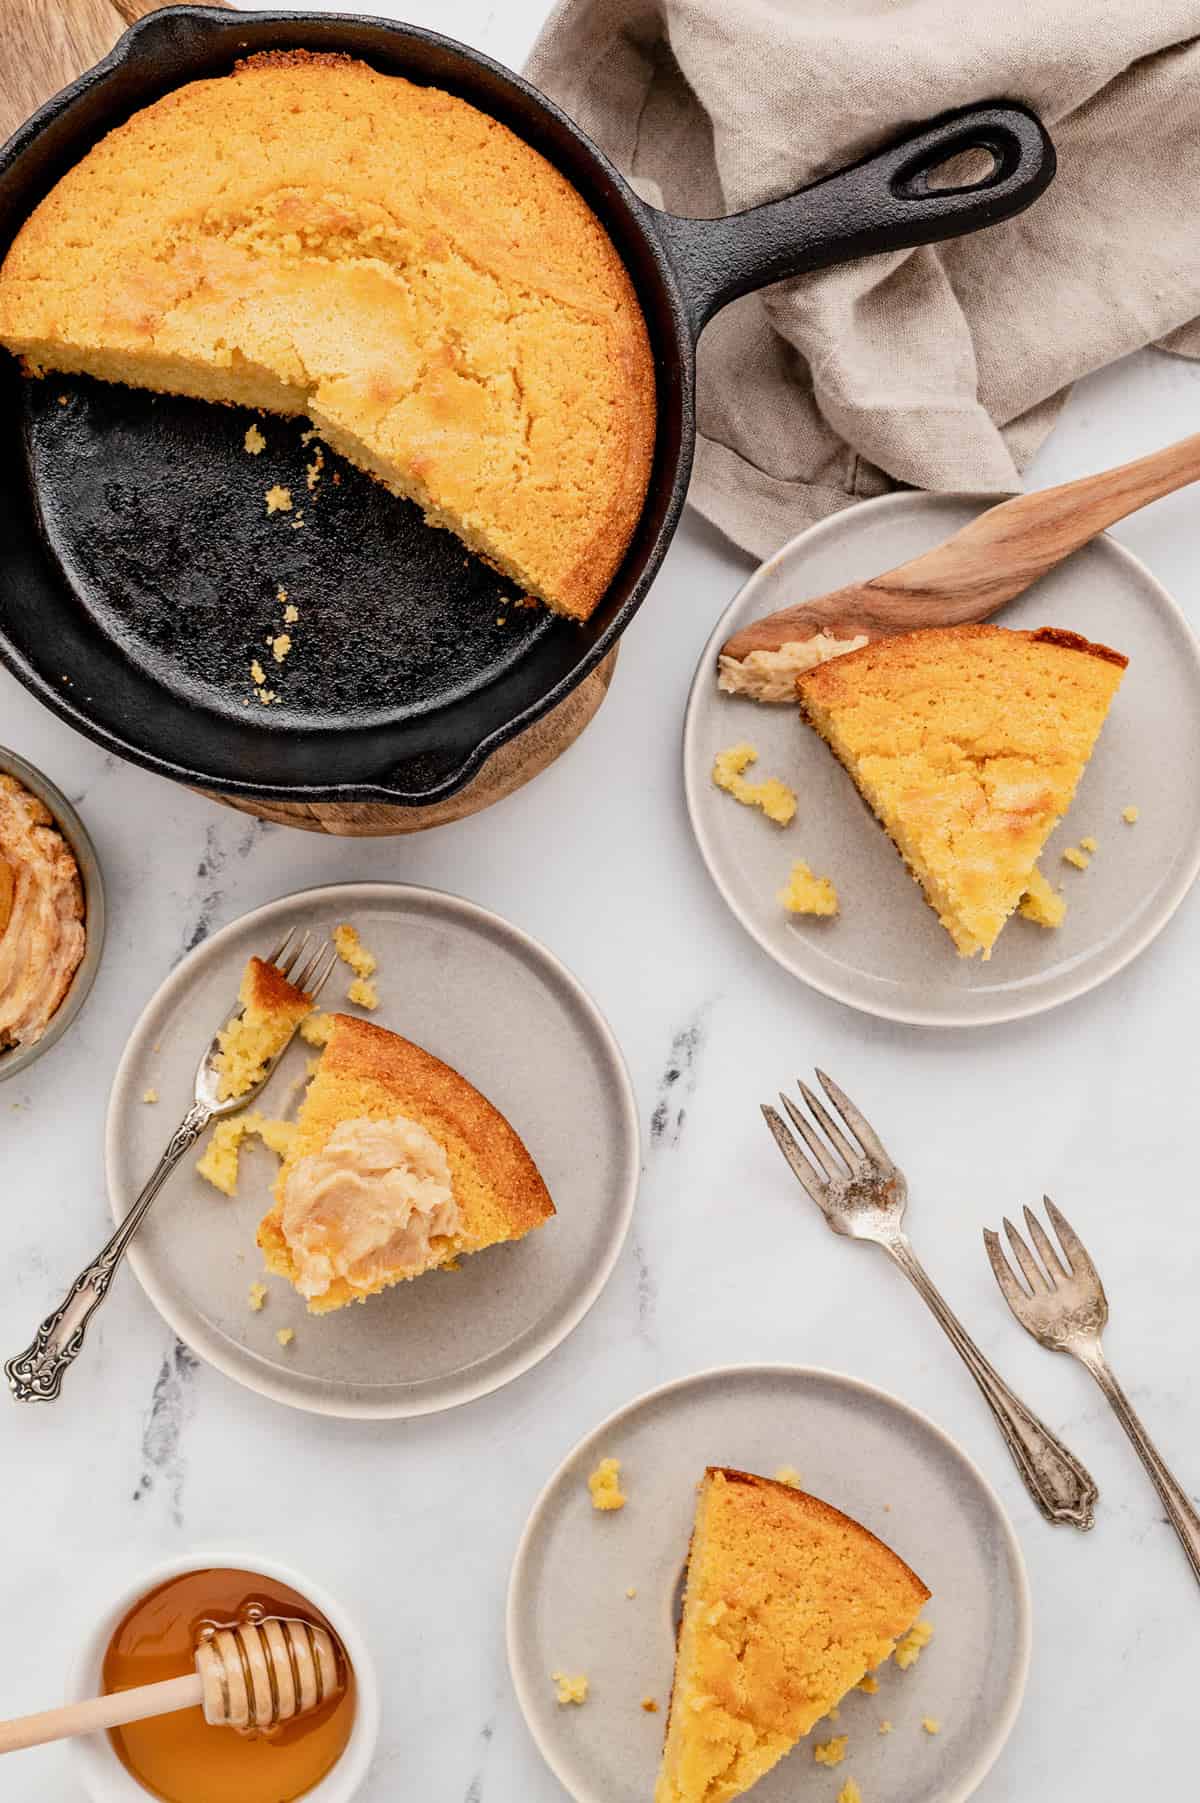 A skillet cornbread off to the side with three small plates, each with a slice on it.